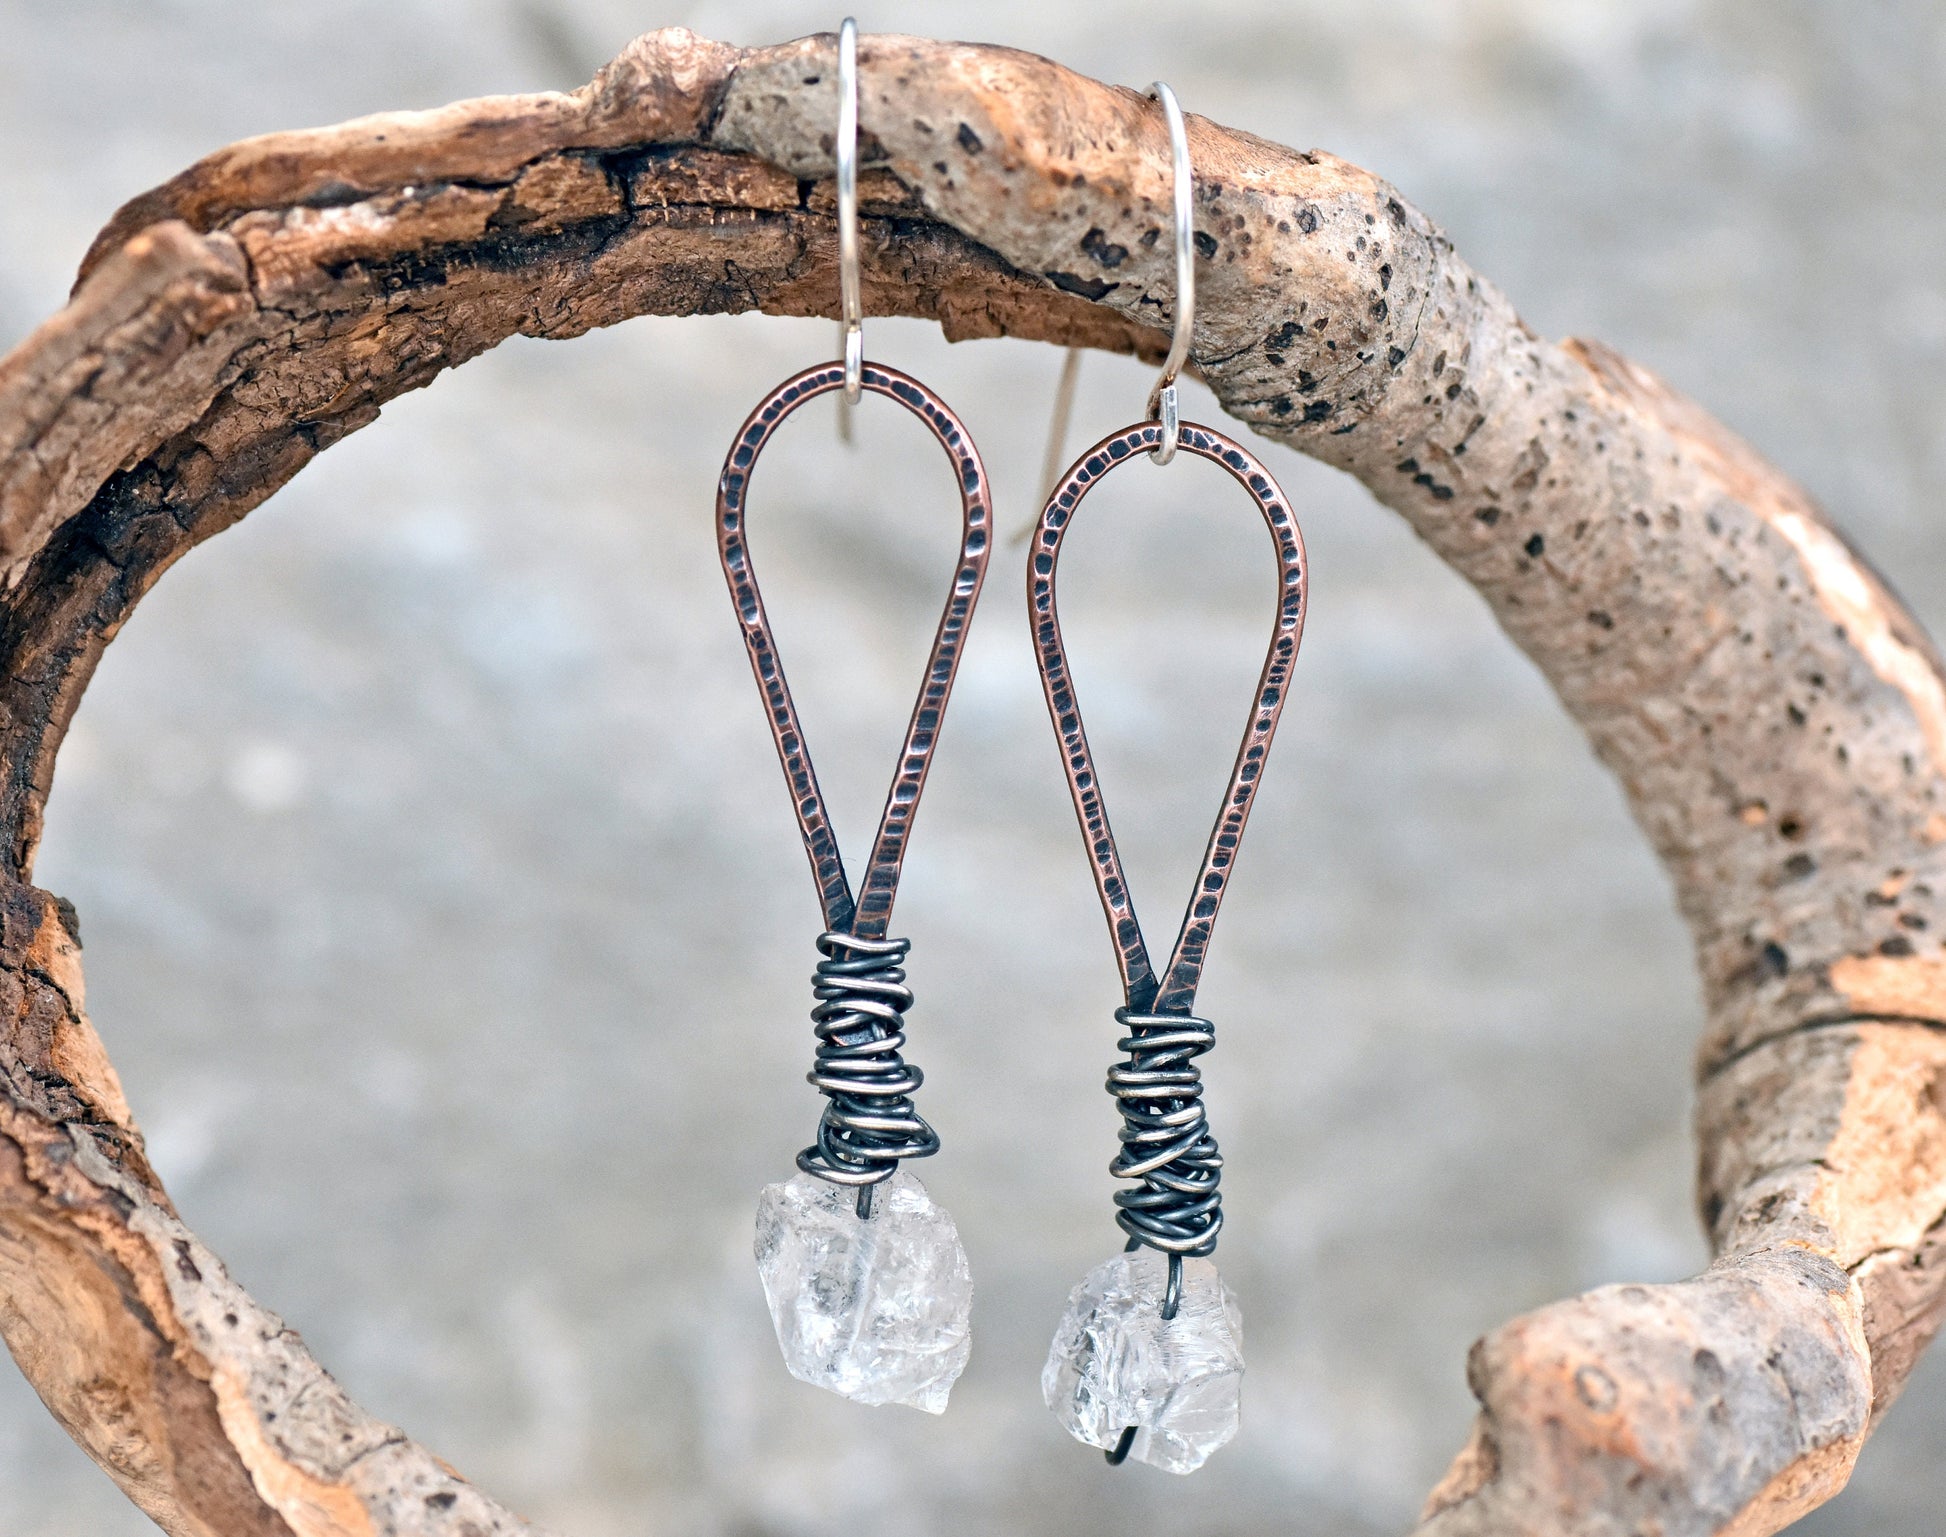 Raw Quartz Crystal Earrings, Rough Stone Mixed Metal Dangles, Rustic Copper Gemstone Jewelry, Sterling Silver Ear Wires